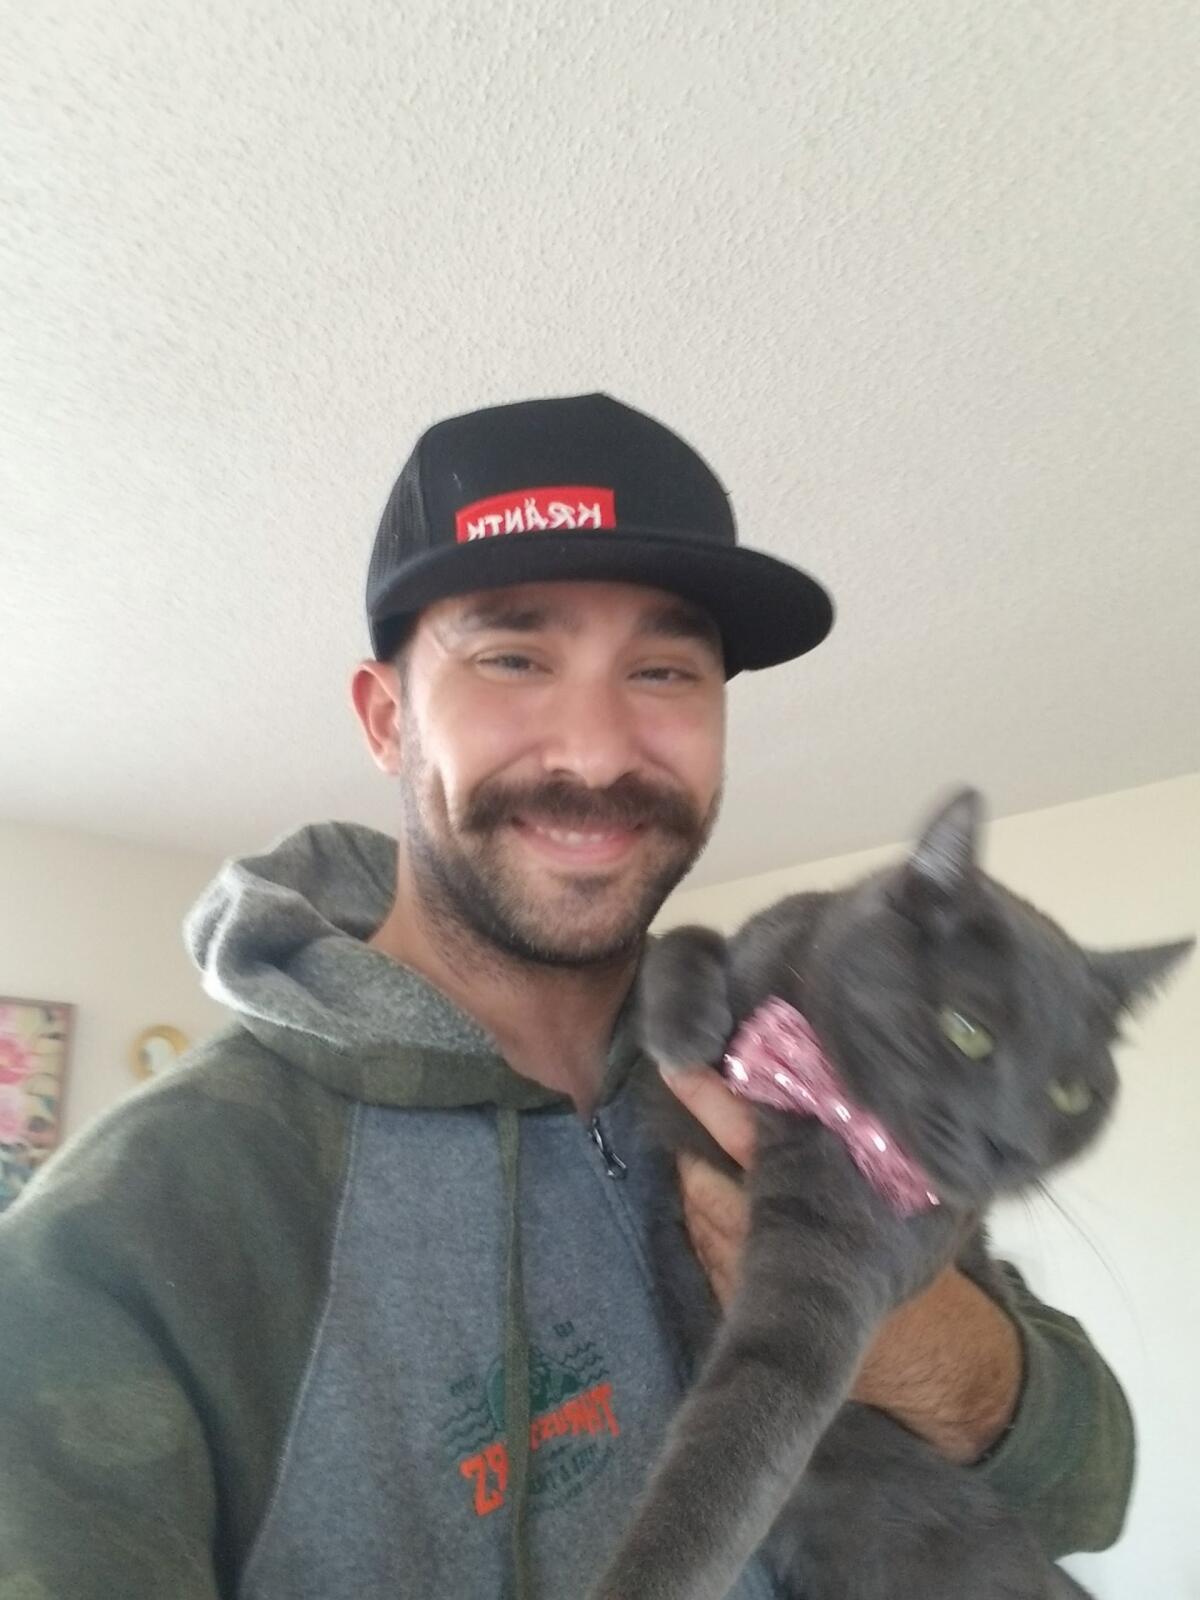 Nicolas Perez with Kittanha, his new cat recently adopted from Cat Palace by Champagne Queen